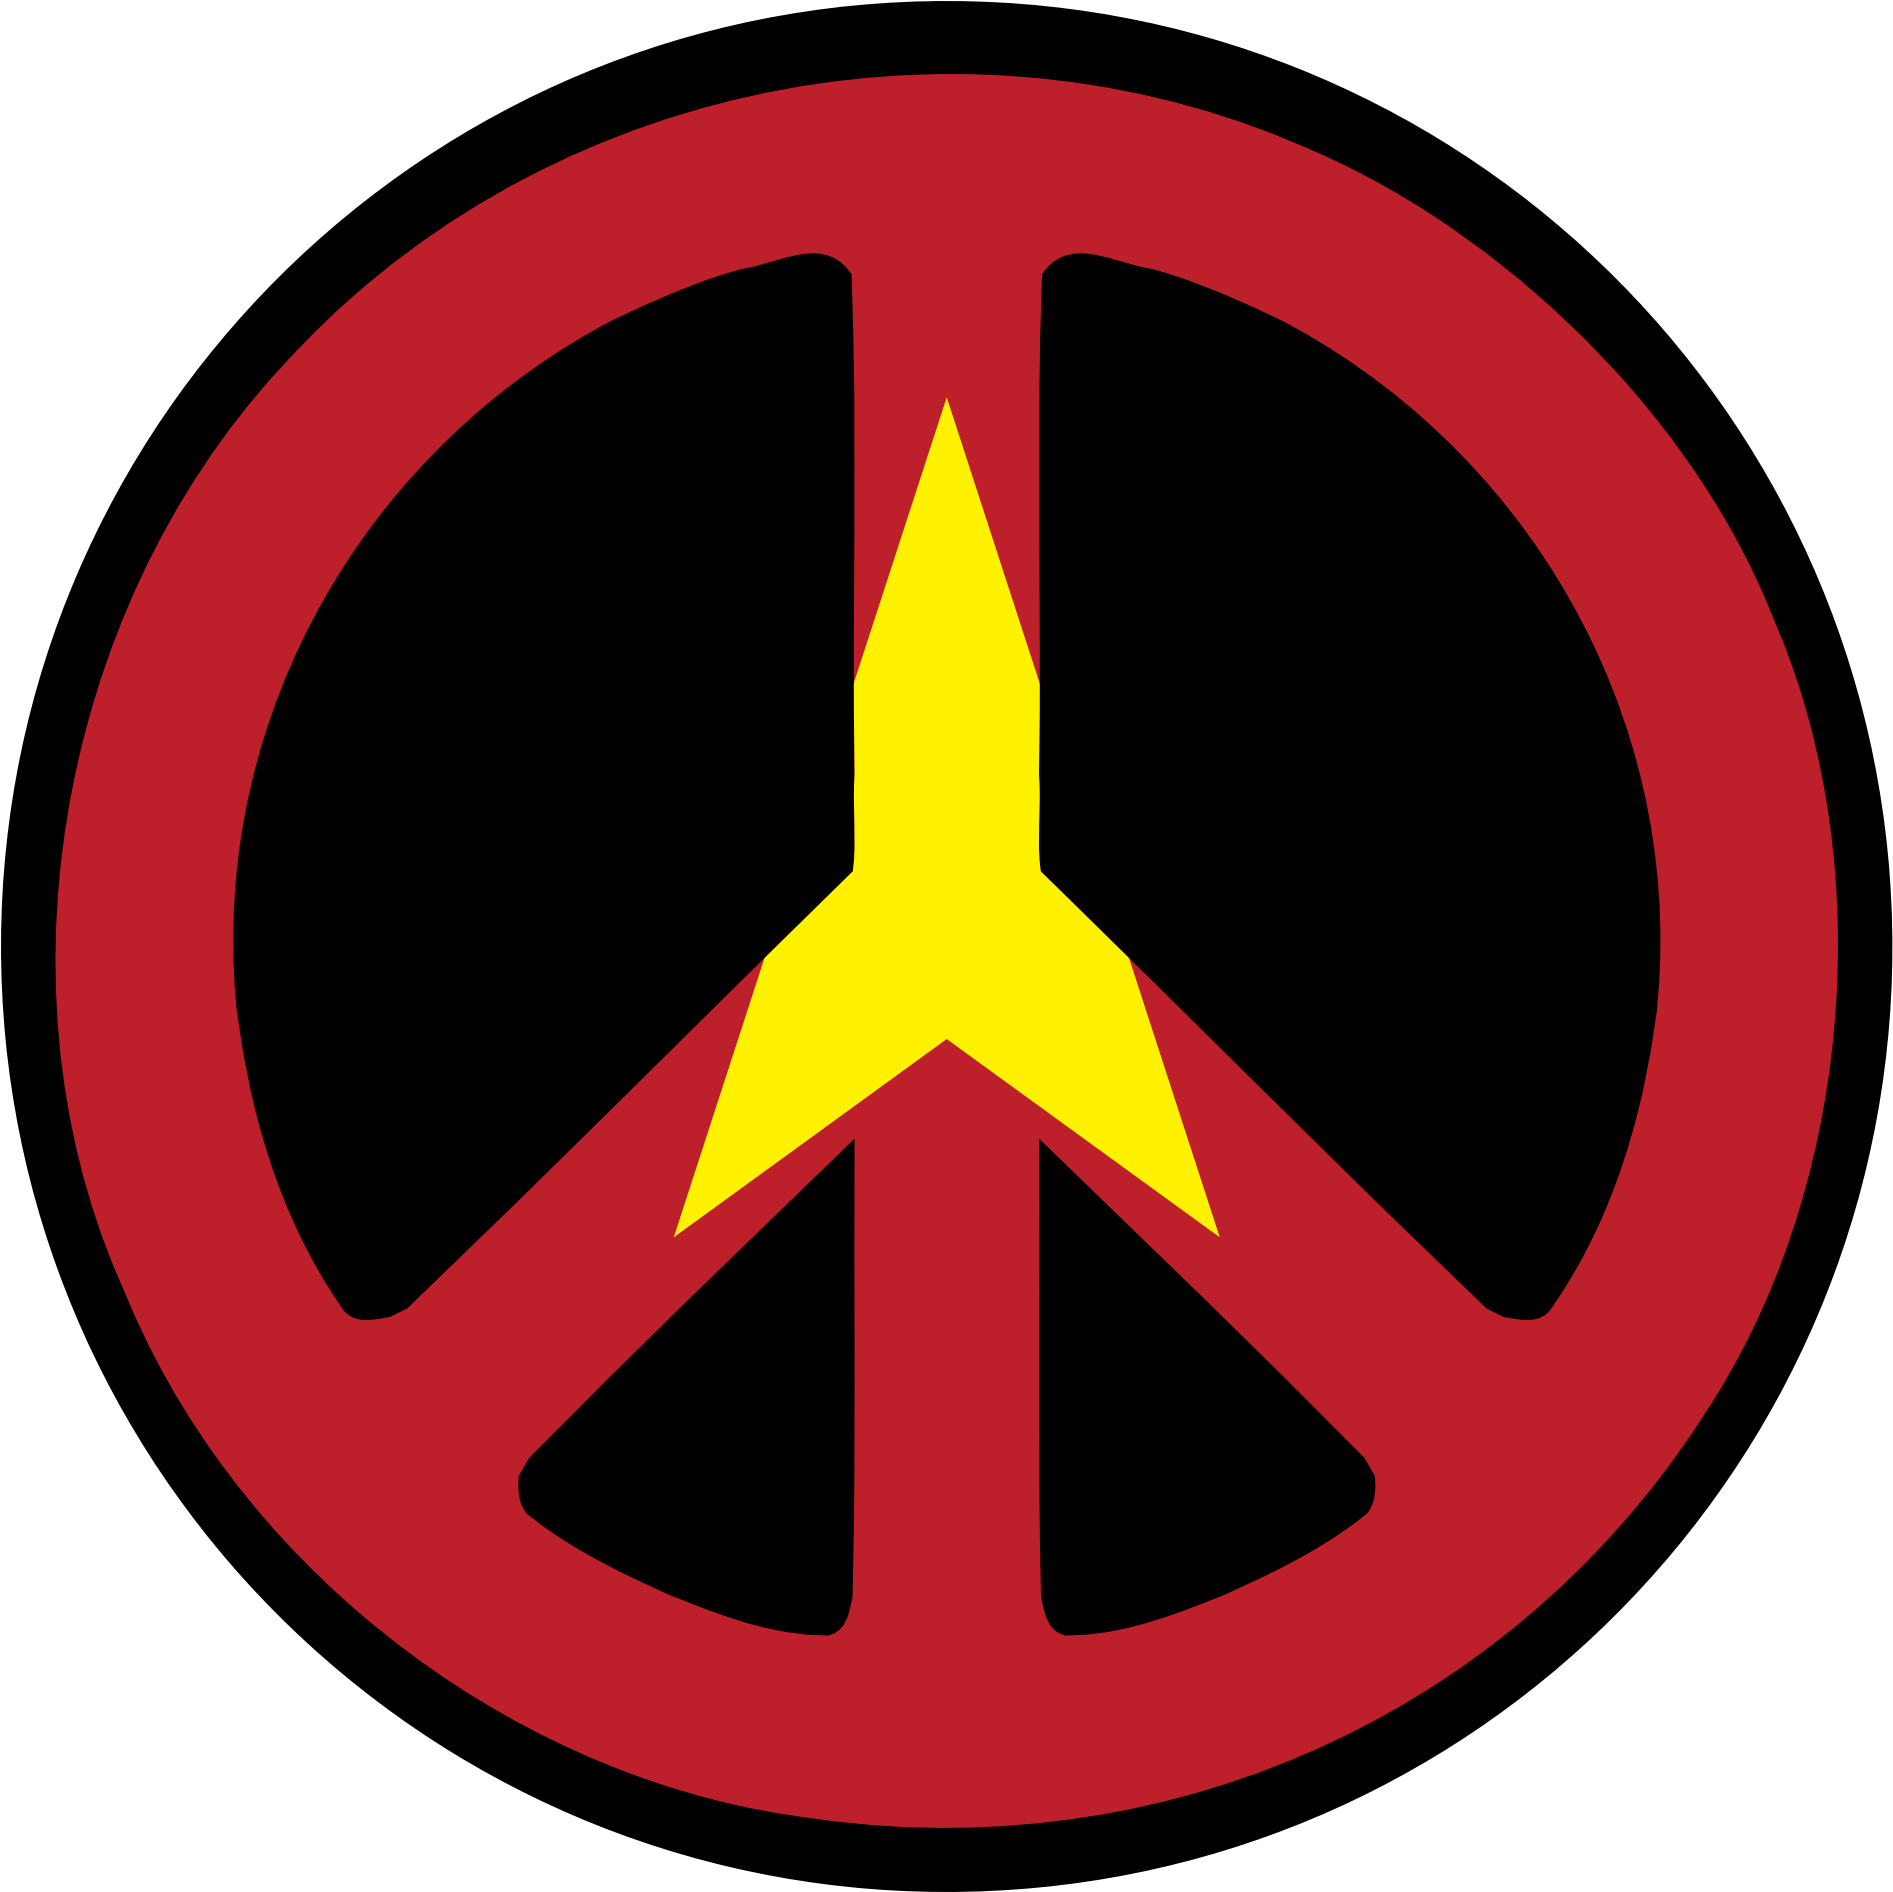 A Red Peace Sign With A Yellow Star